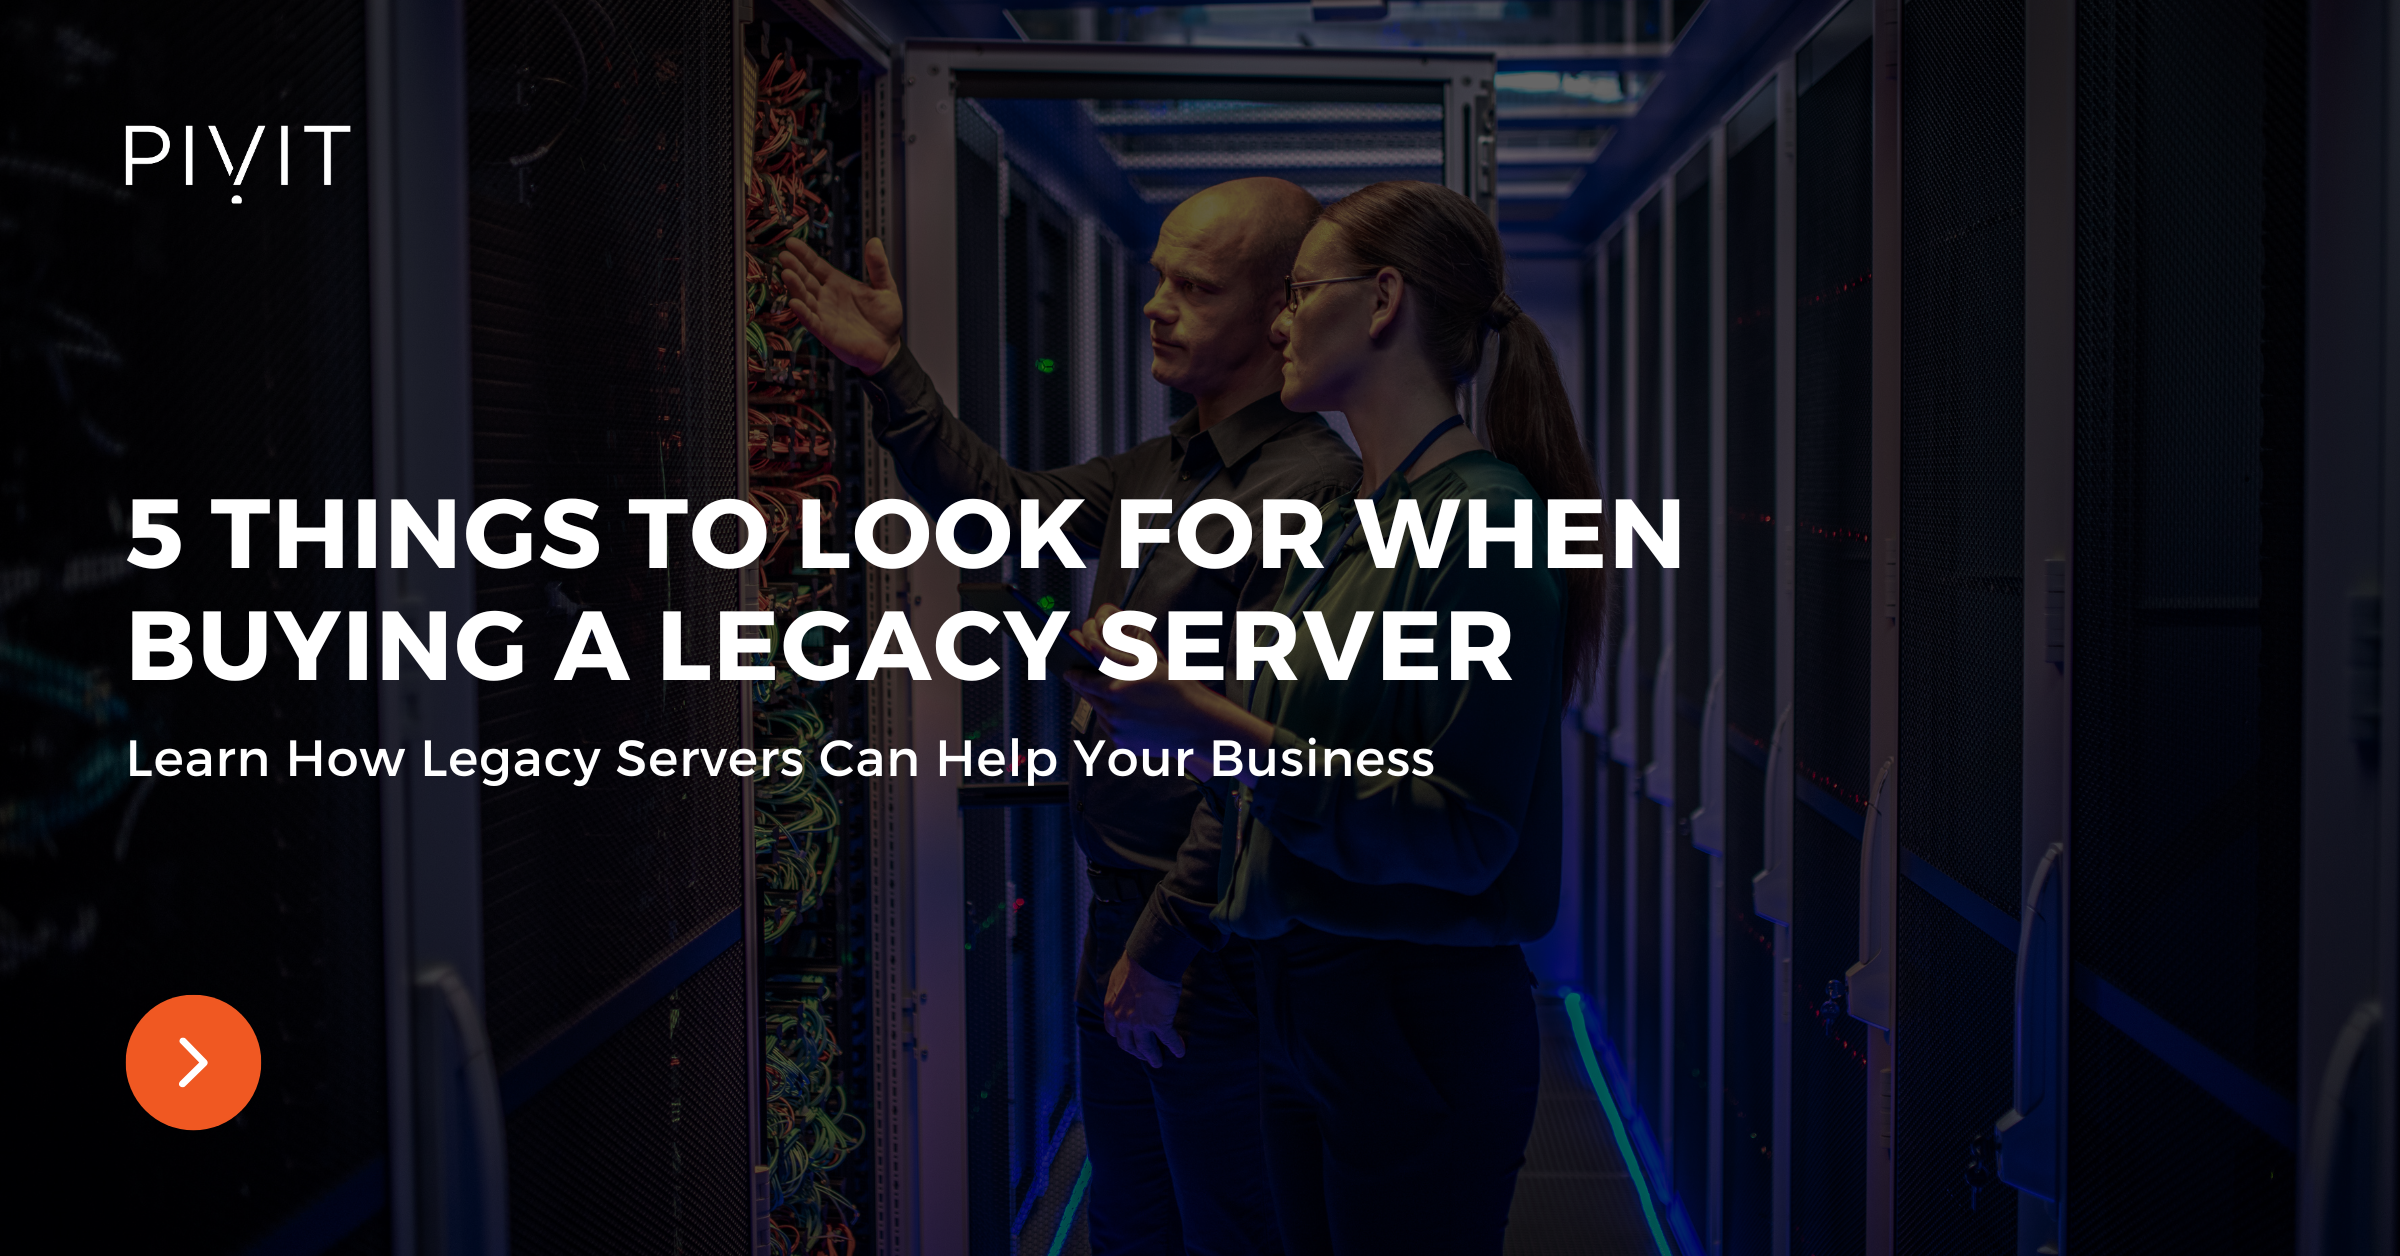 5 Things to Look for When Buying a Legacy Server